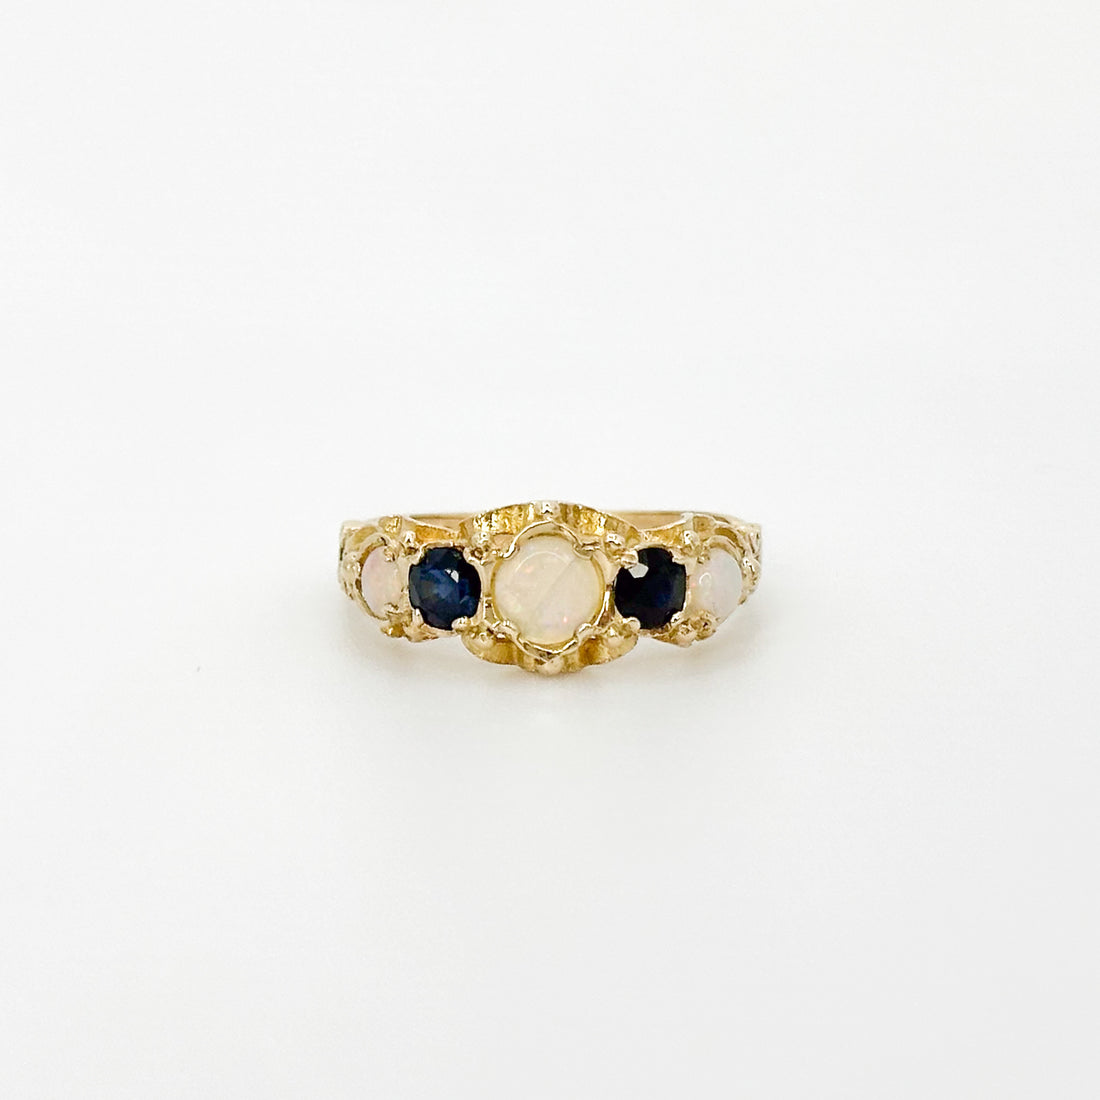 Opal and Sapphire Vintage Ring